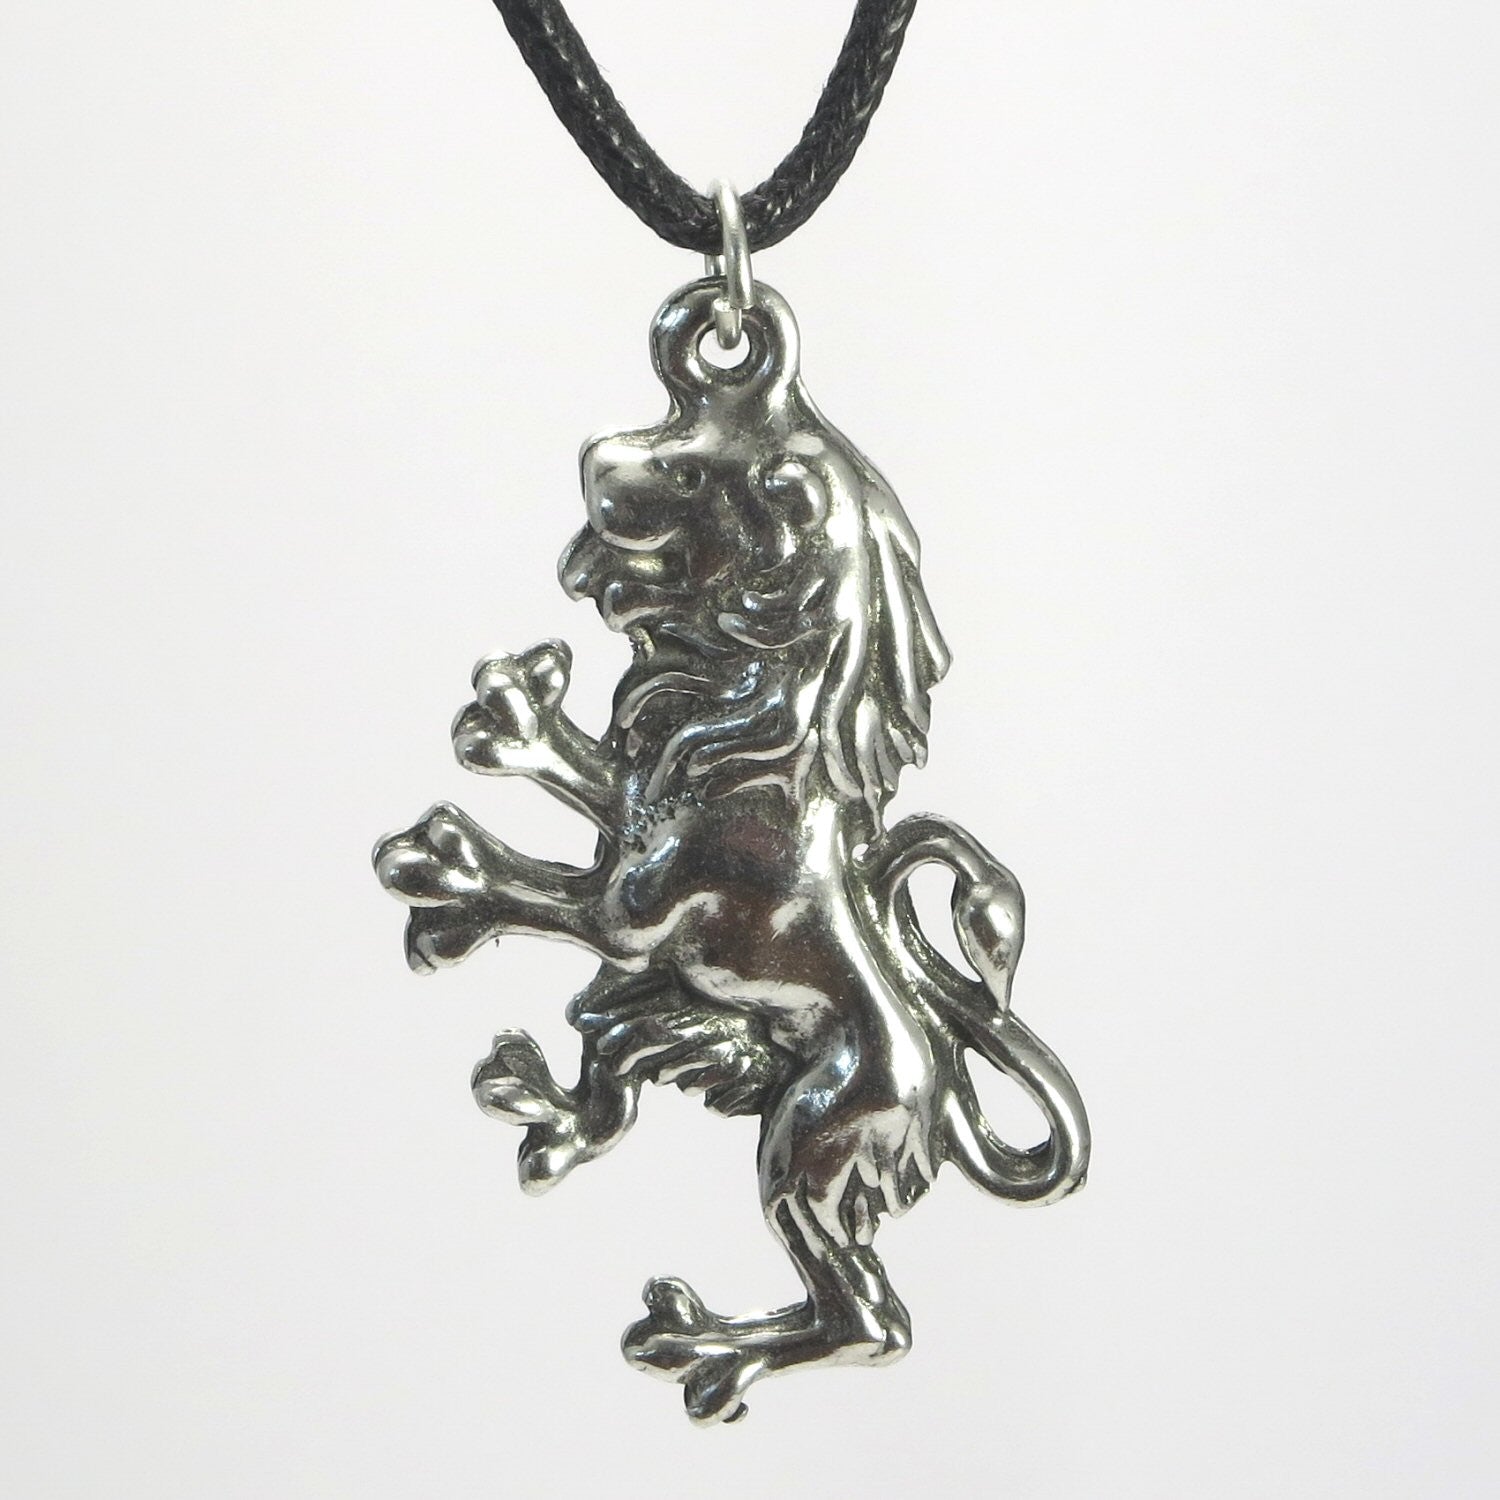 MET-00025: 45mm XL Pewter Dragon Charm with Blue Cabochon